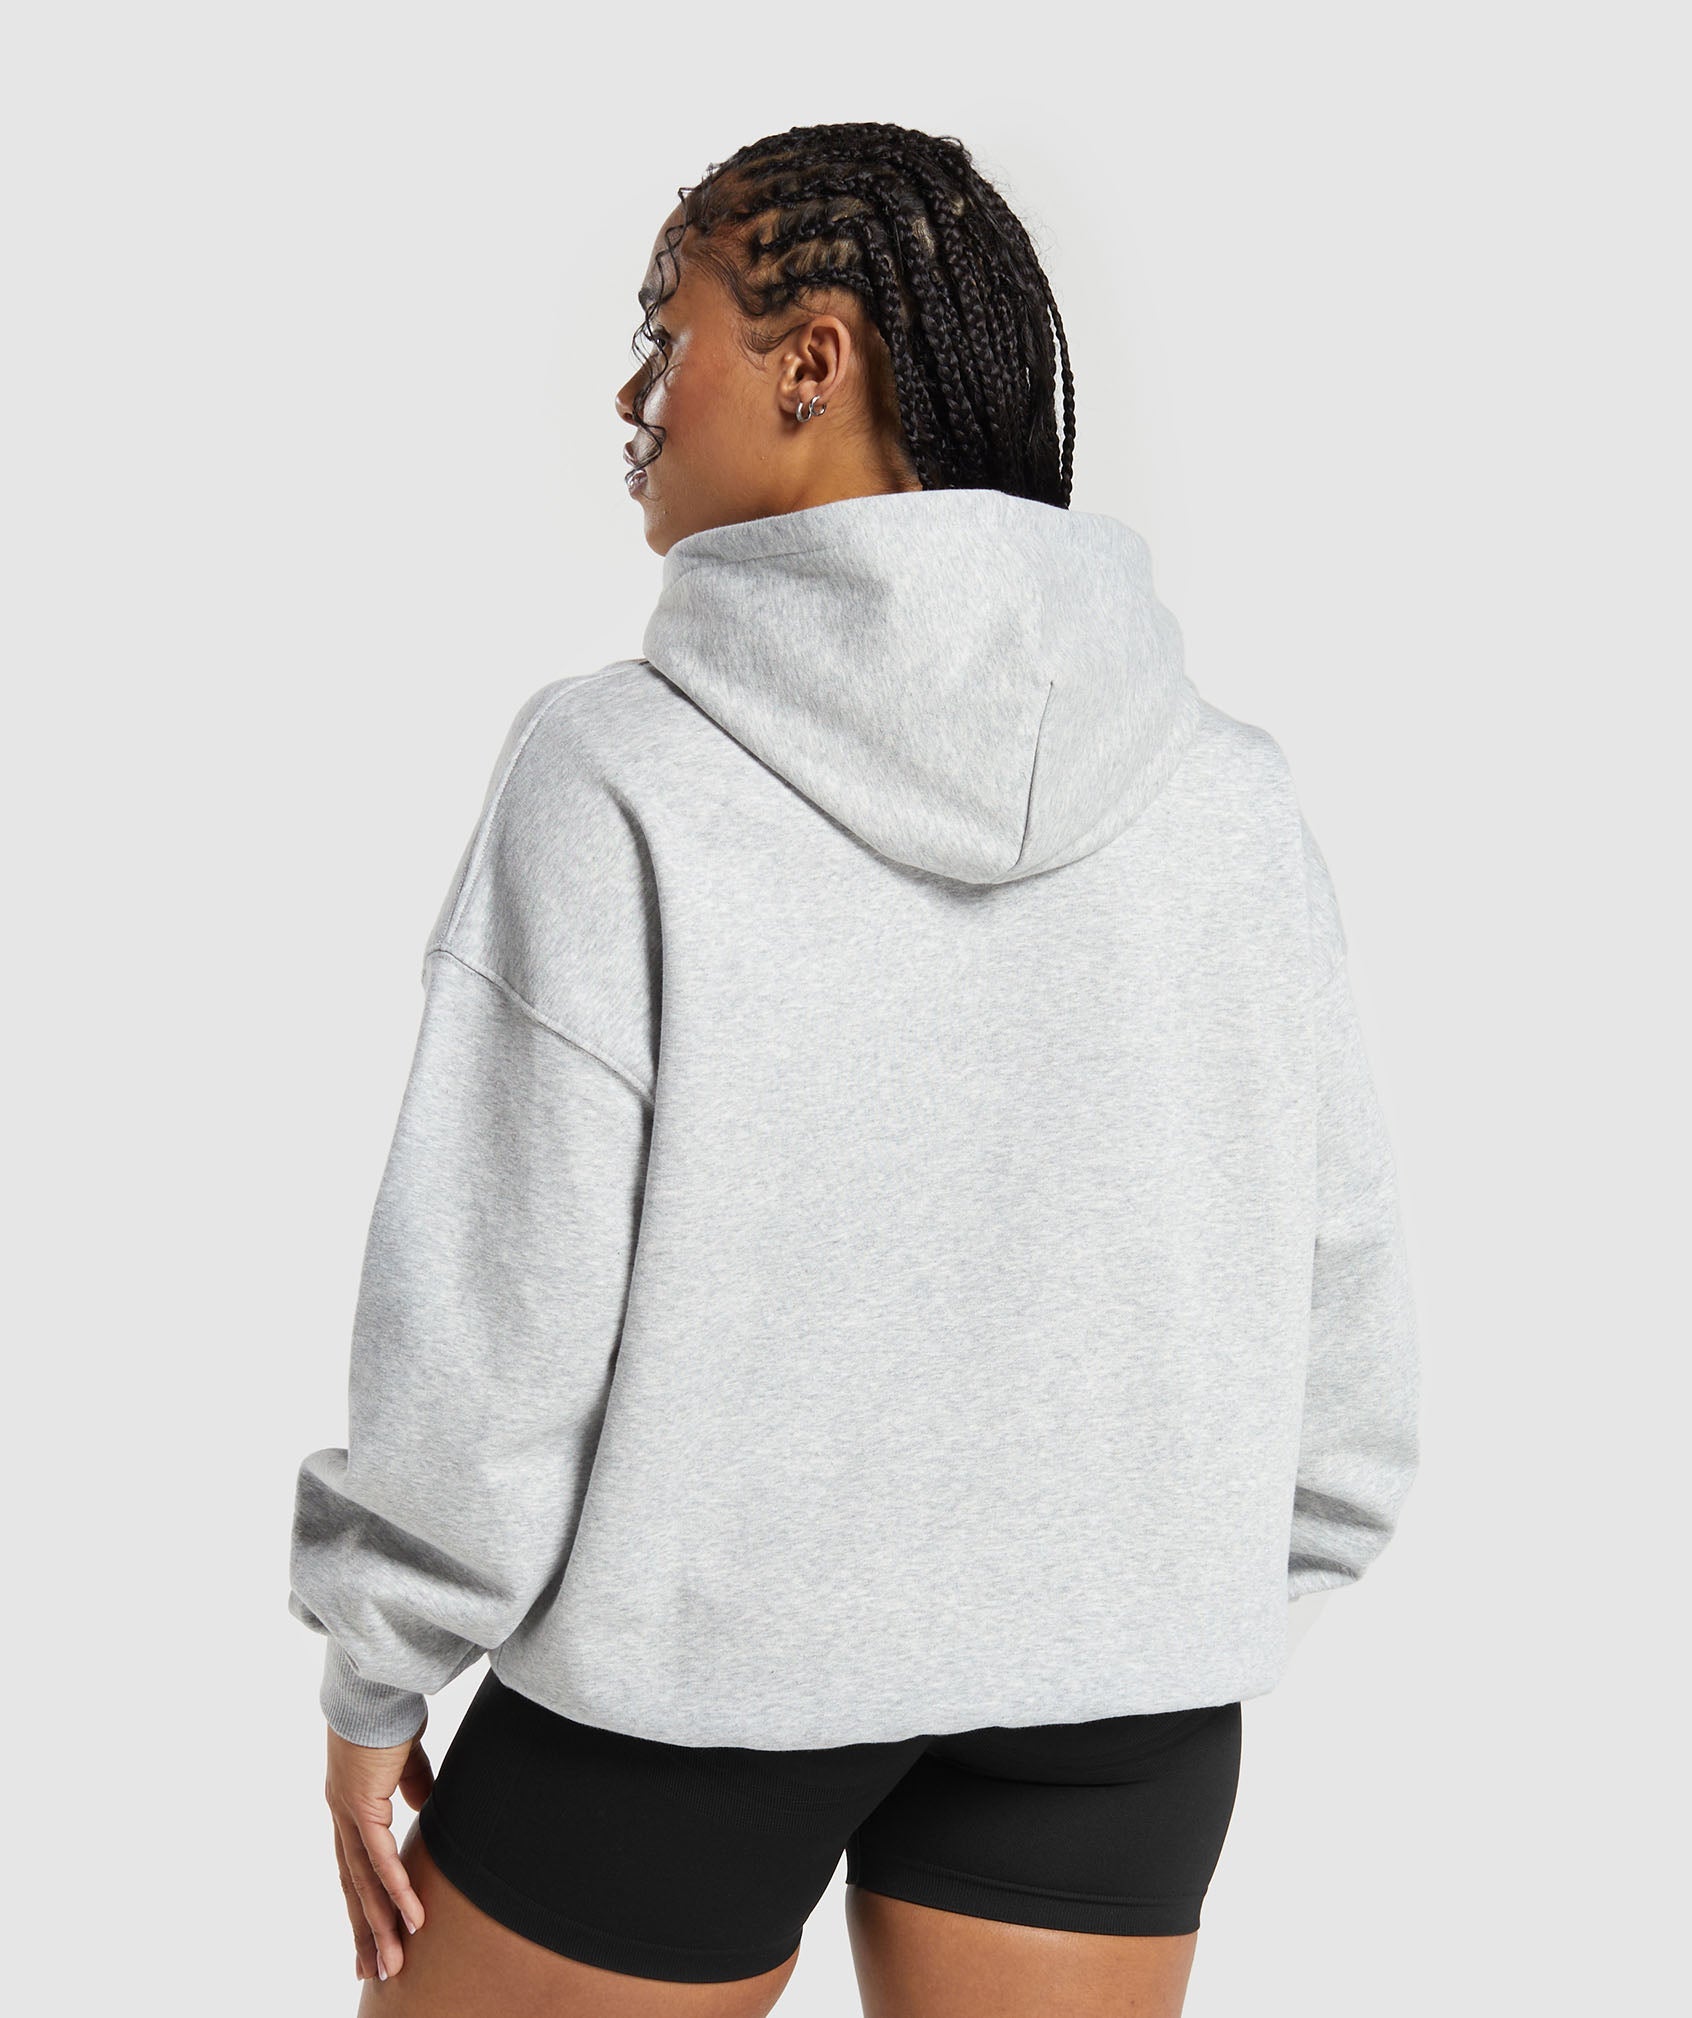 Weightlifting Oversized Hoodie in Light Grey Core Marl - view 2